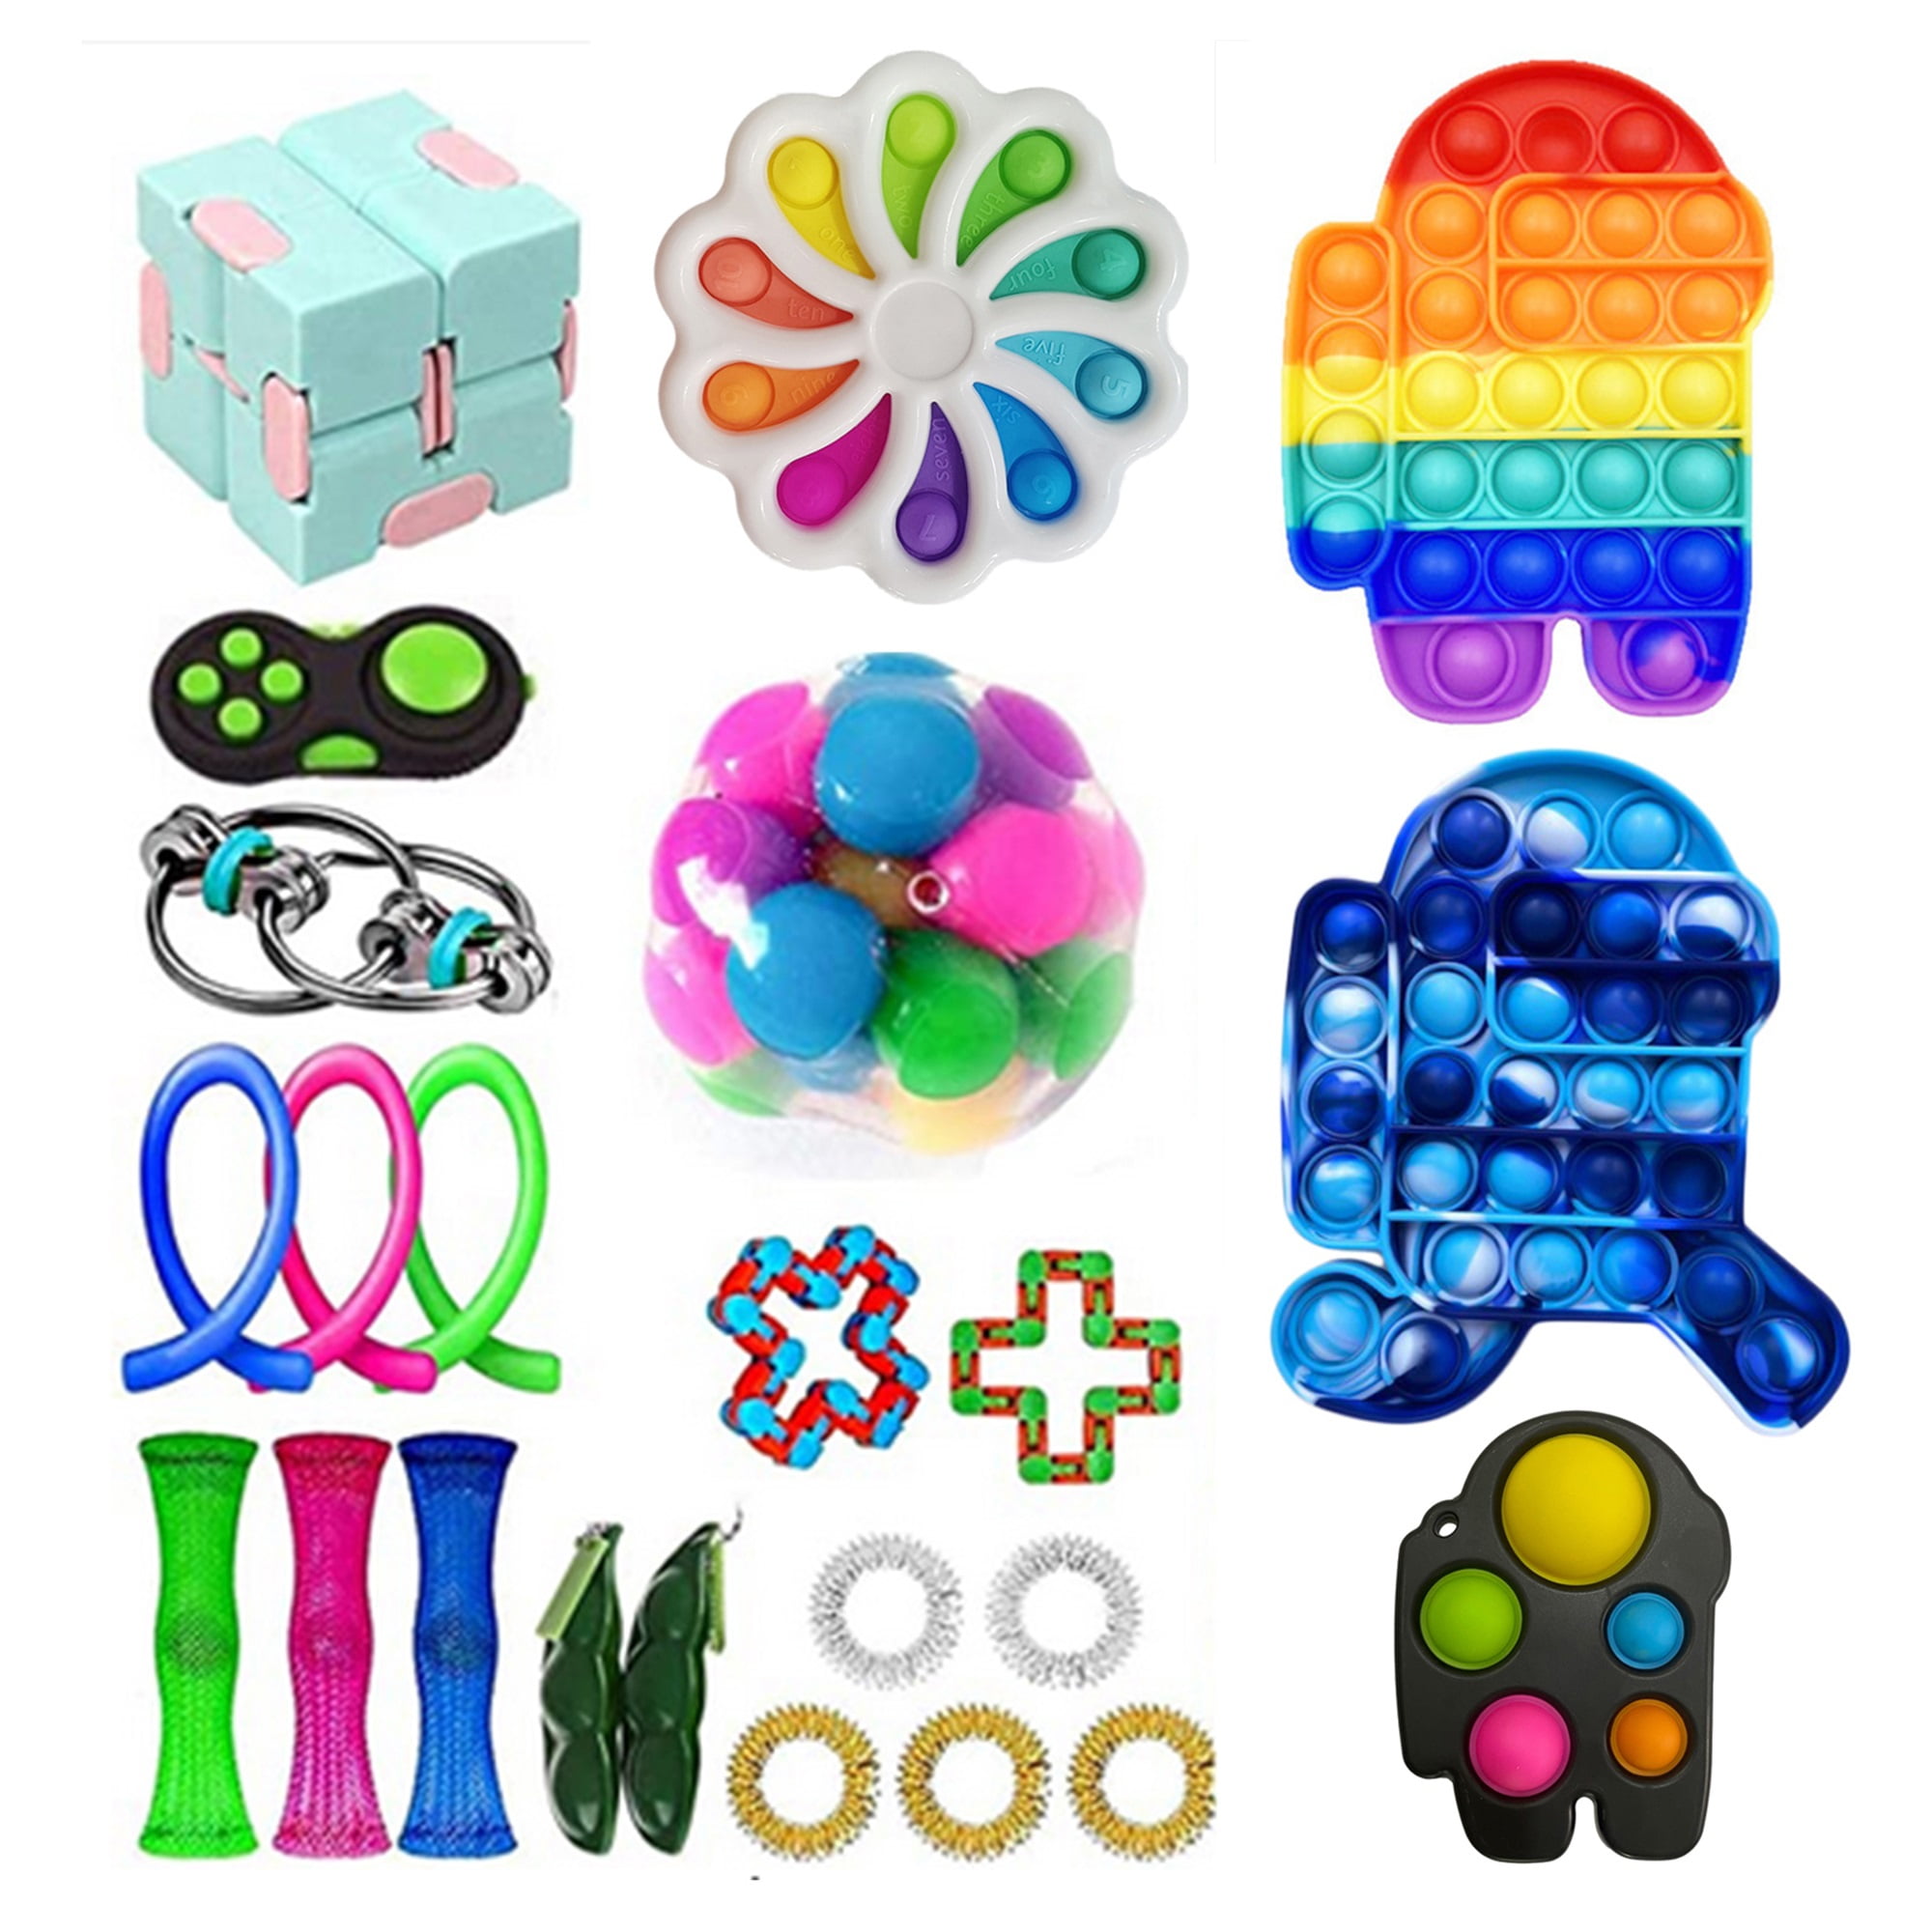 Fidget Toys Cube Sensory Tools Bundle Stress Relief Hand Kids Adults Toy IND 